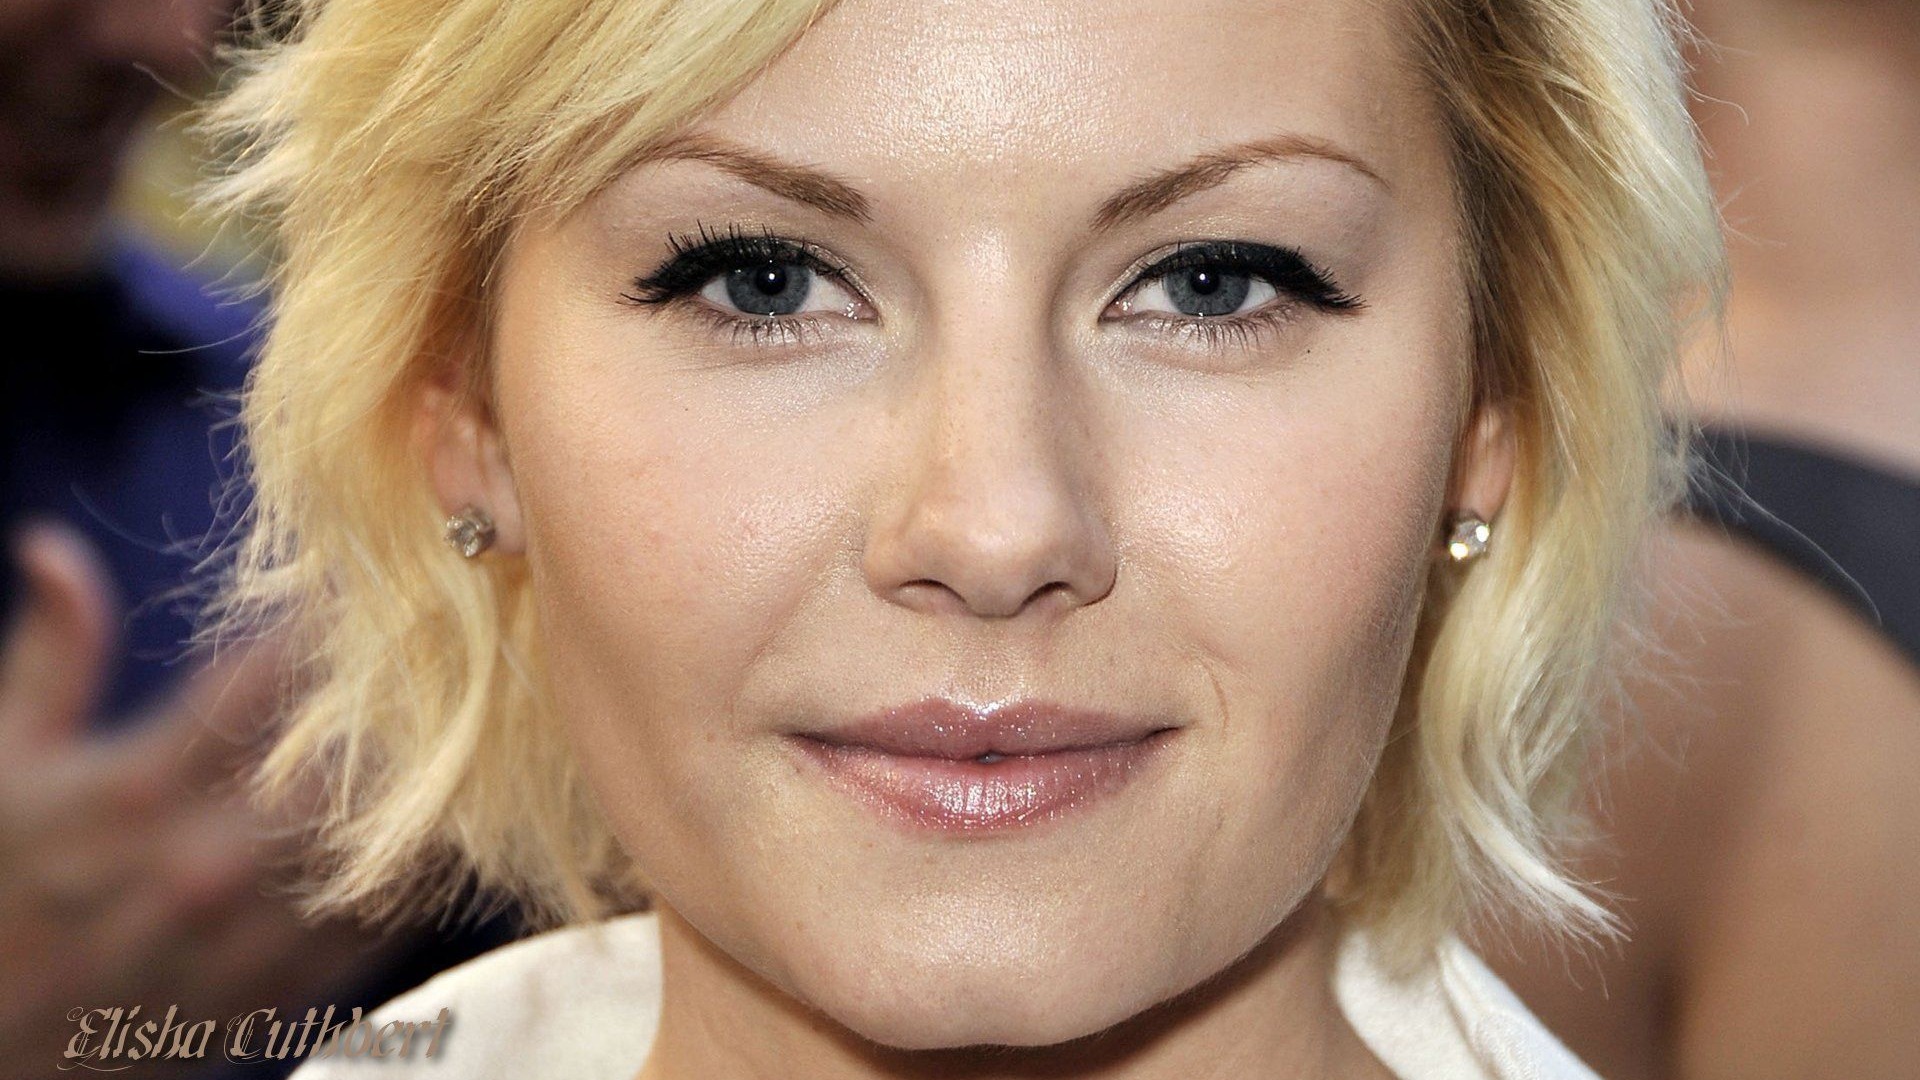 Elisha Cuthbert #005 - 1920x1080 Wallpapers Pictures Photos Images